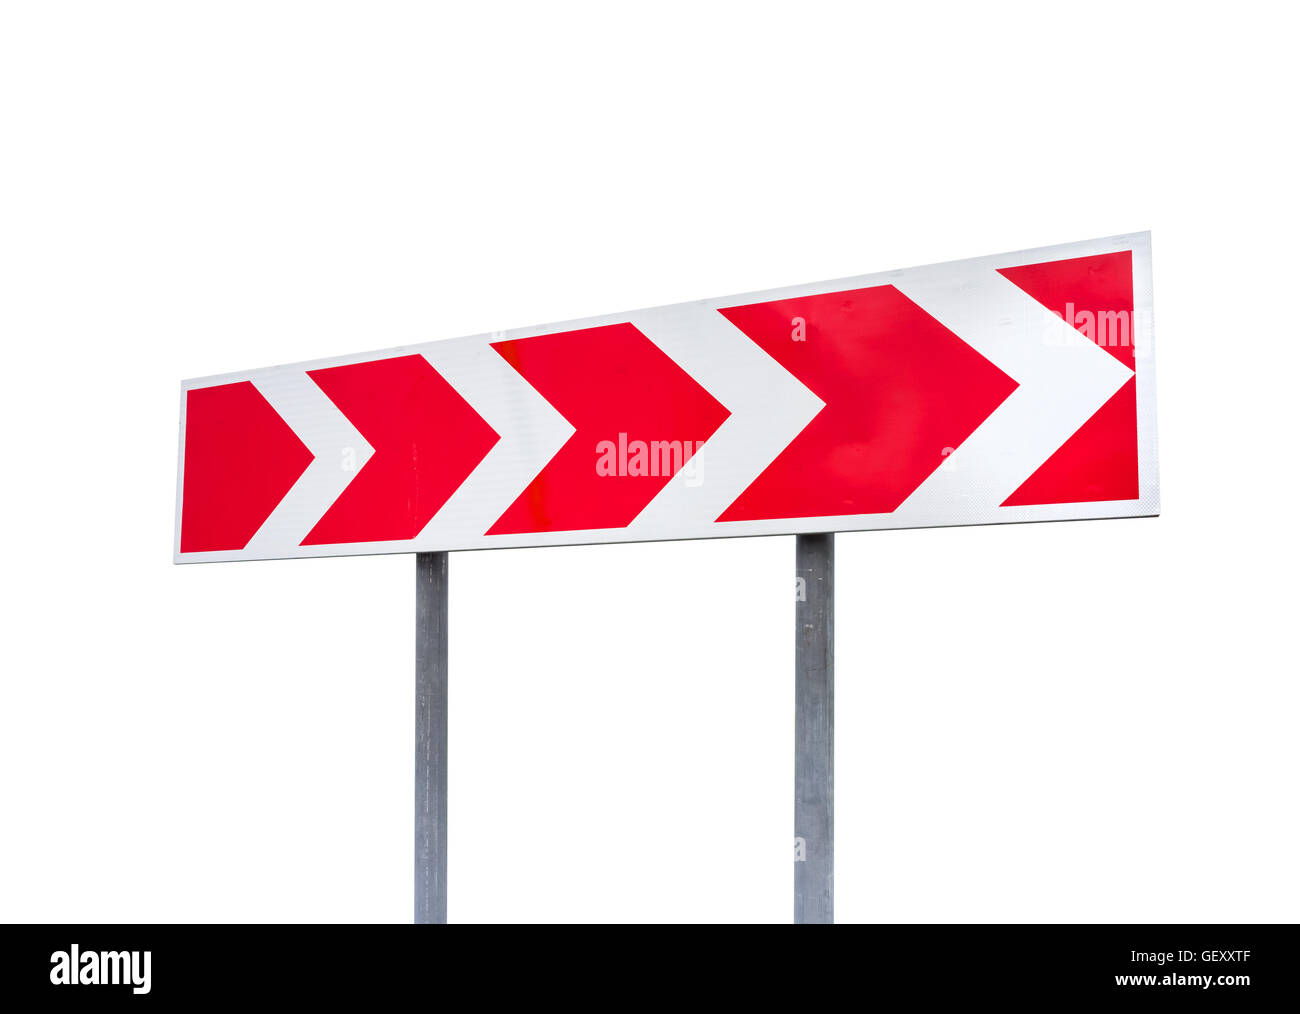 Dangerous turn. Red and white stripped arrow. Road sign isolated on white background with perspective effect Stock Photo